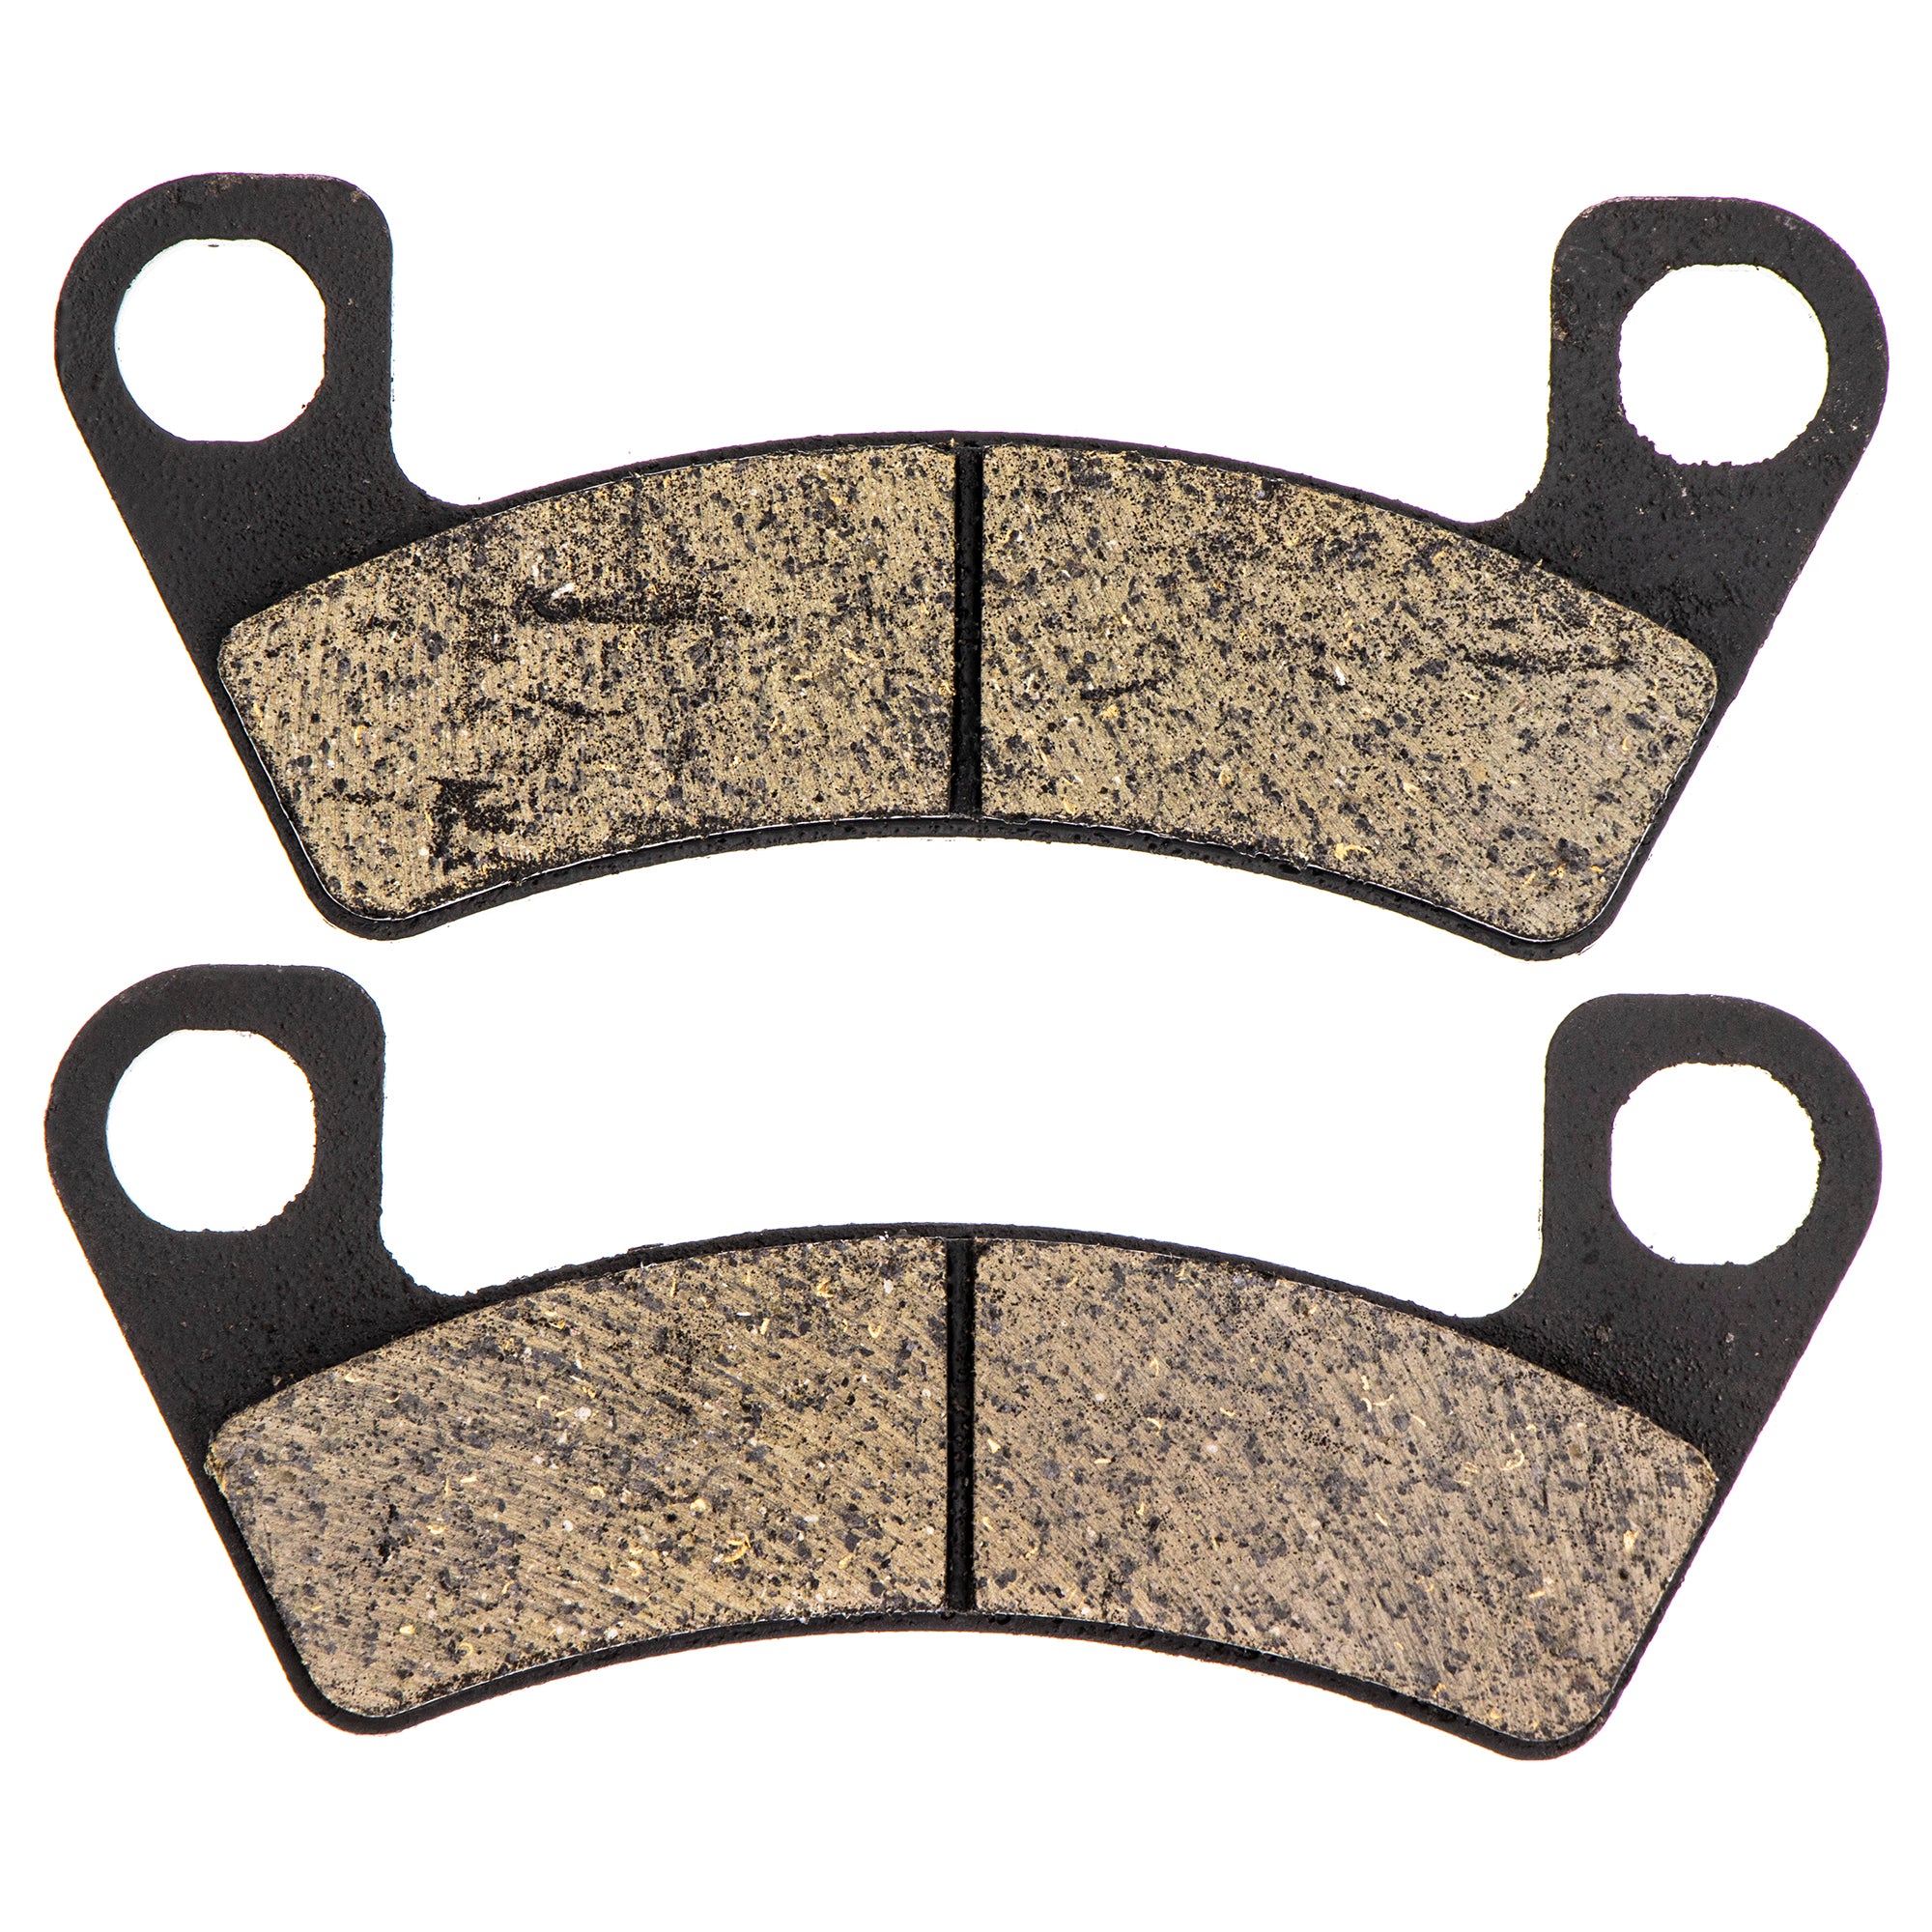 NICHE 519-KPA2353D Front Brake Pad Set 2-Pack for Arctic Cat Textron